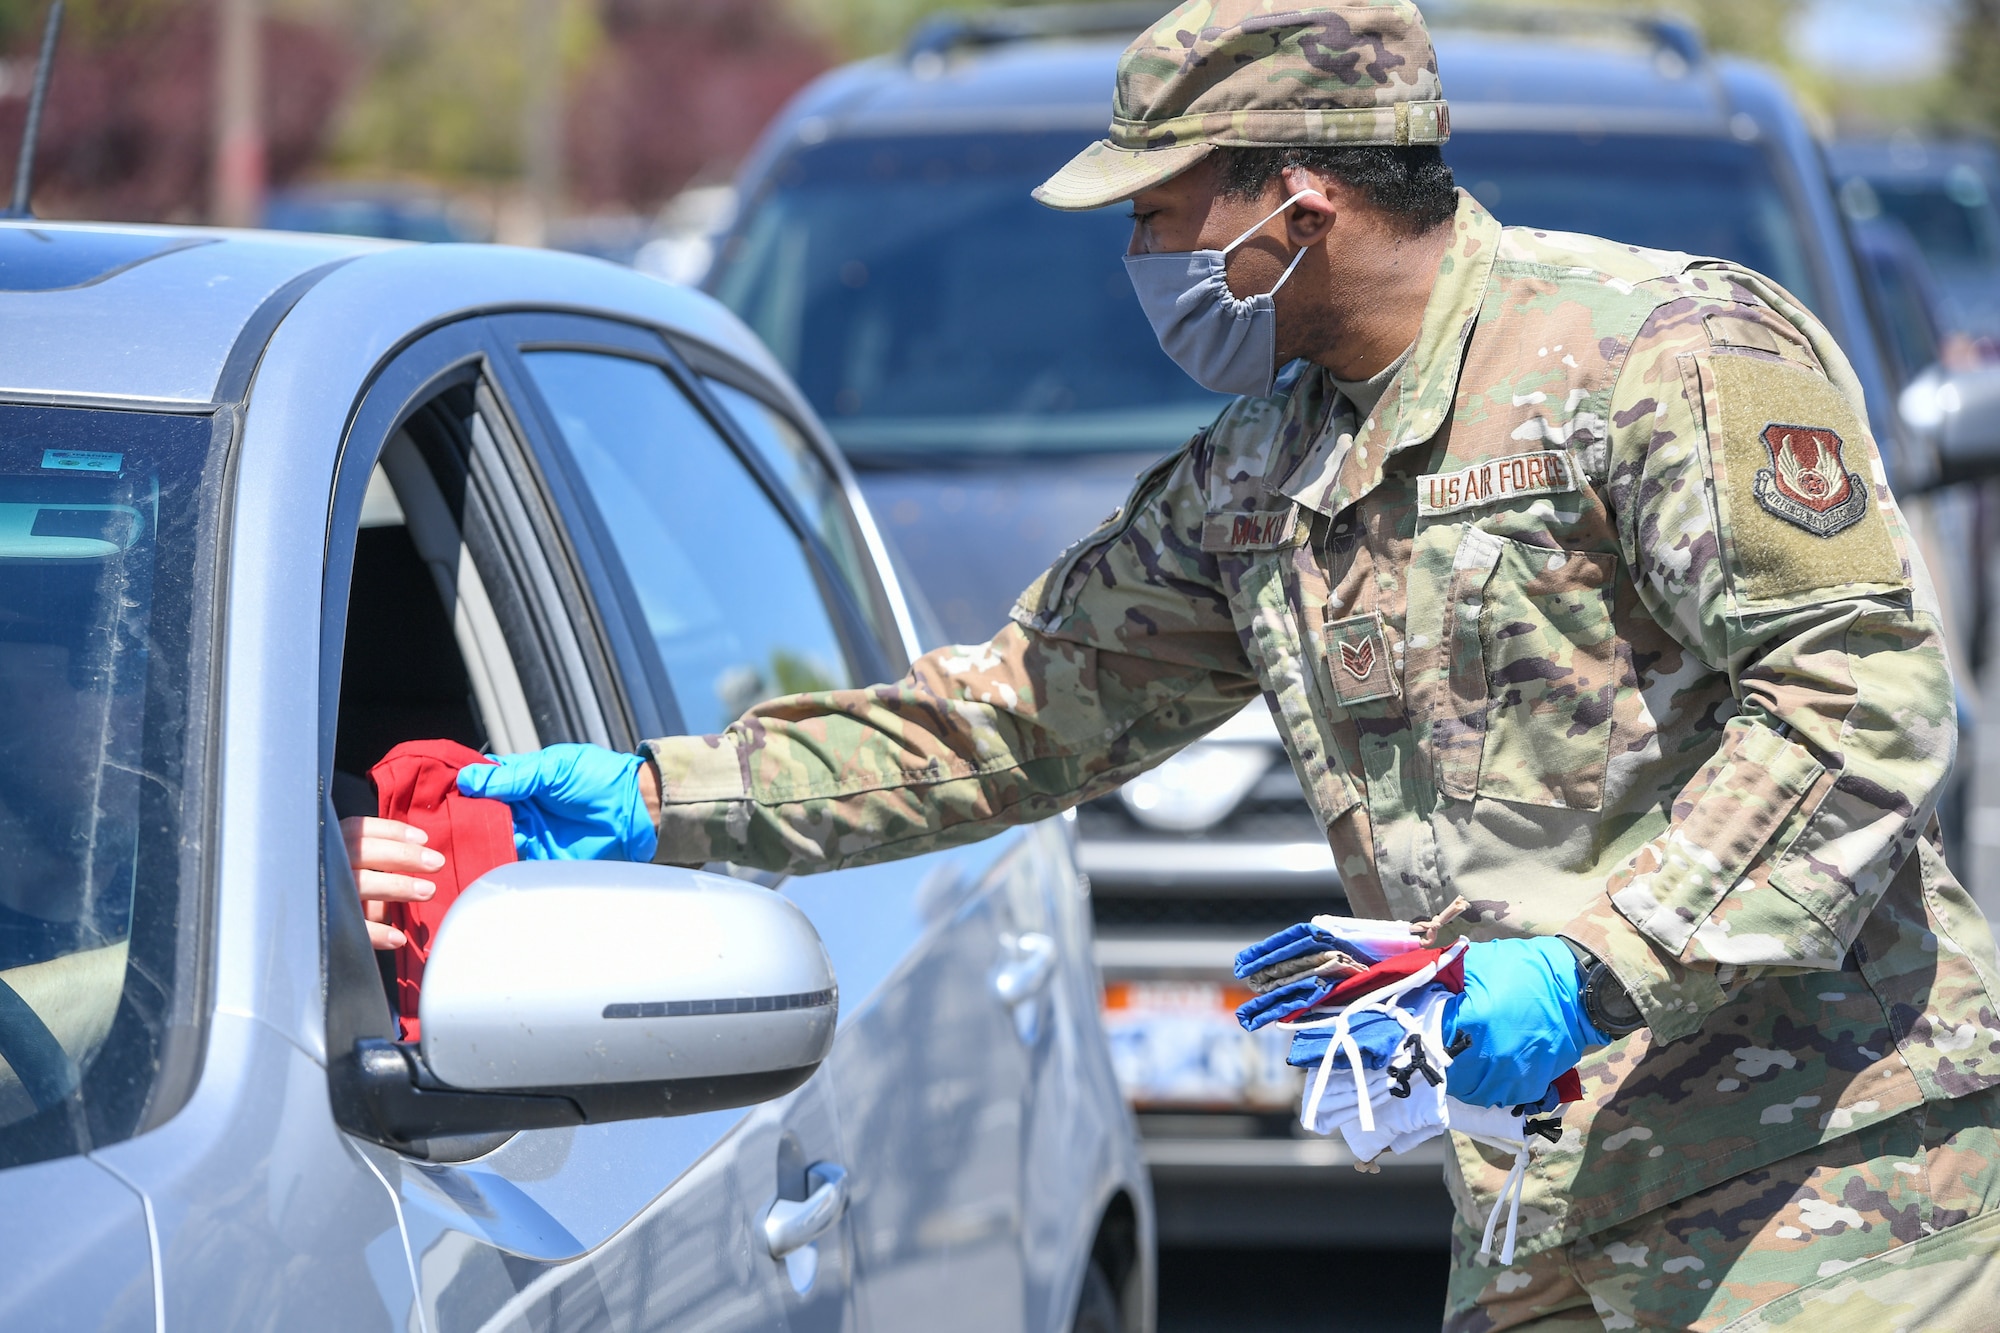 Staff. Sgt. Nicklas Mulkey, 75th Air Base Wing, hands out masks to military and civilian Airmen April 28, 2020, at Hill Air Force Base, Utah. Around 4,000 masks, most donated from nearby communities and also from the 531st Armament Textile Shop, were given out to Team Hill to keep safe and healthy during the COVID-19 pandemic. (U.S. Air Force photo by Cynthia Griggs)